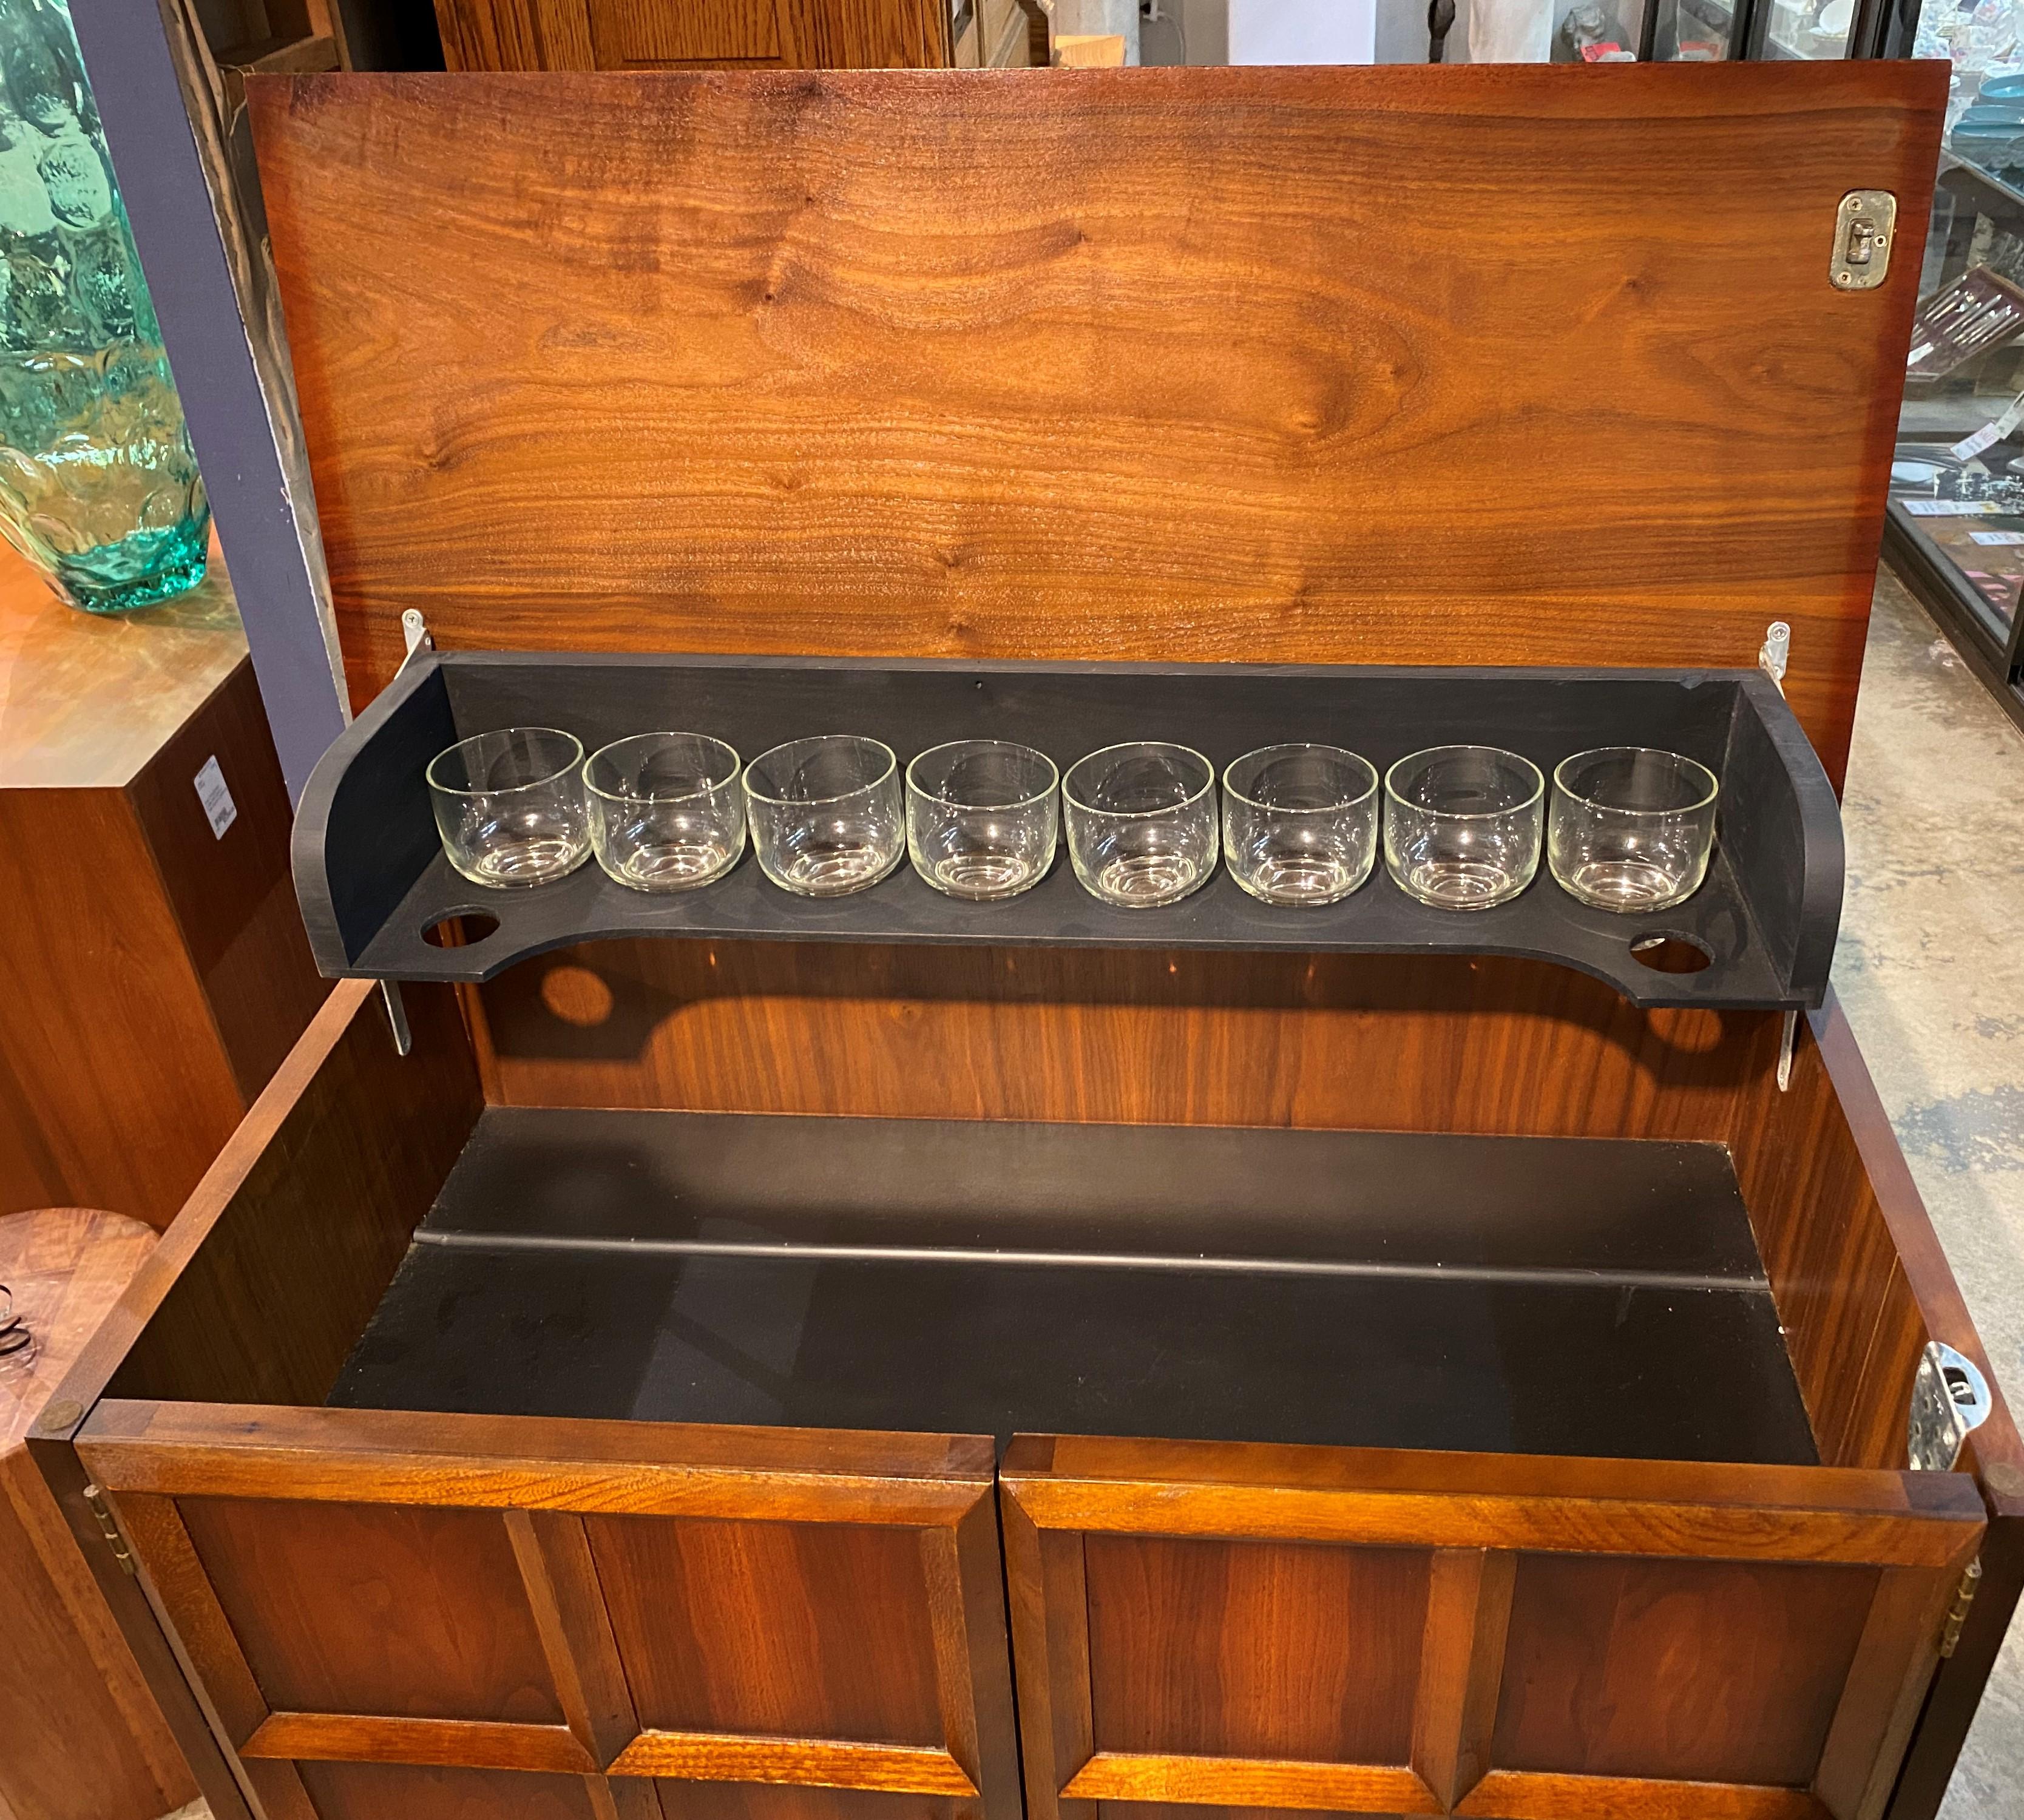 A fine midcentury walnut two door bar or liquor cabinet with lift top by Lane Furniture, opening to glassware storage on the hinged top, as well as on each door, with eight larger glasses on each door, and eight smaller glasses on the top rack. The